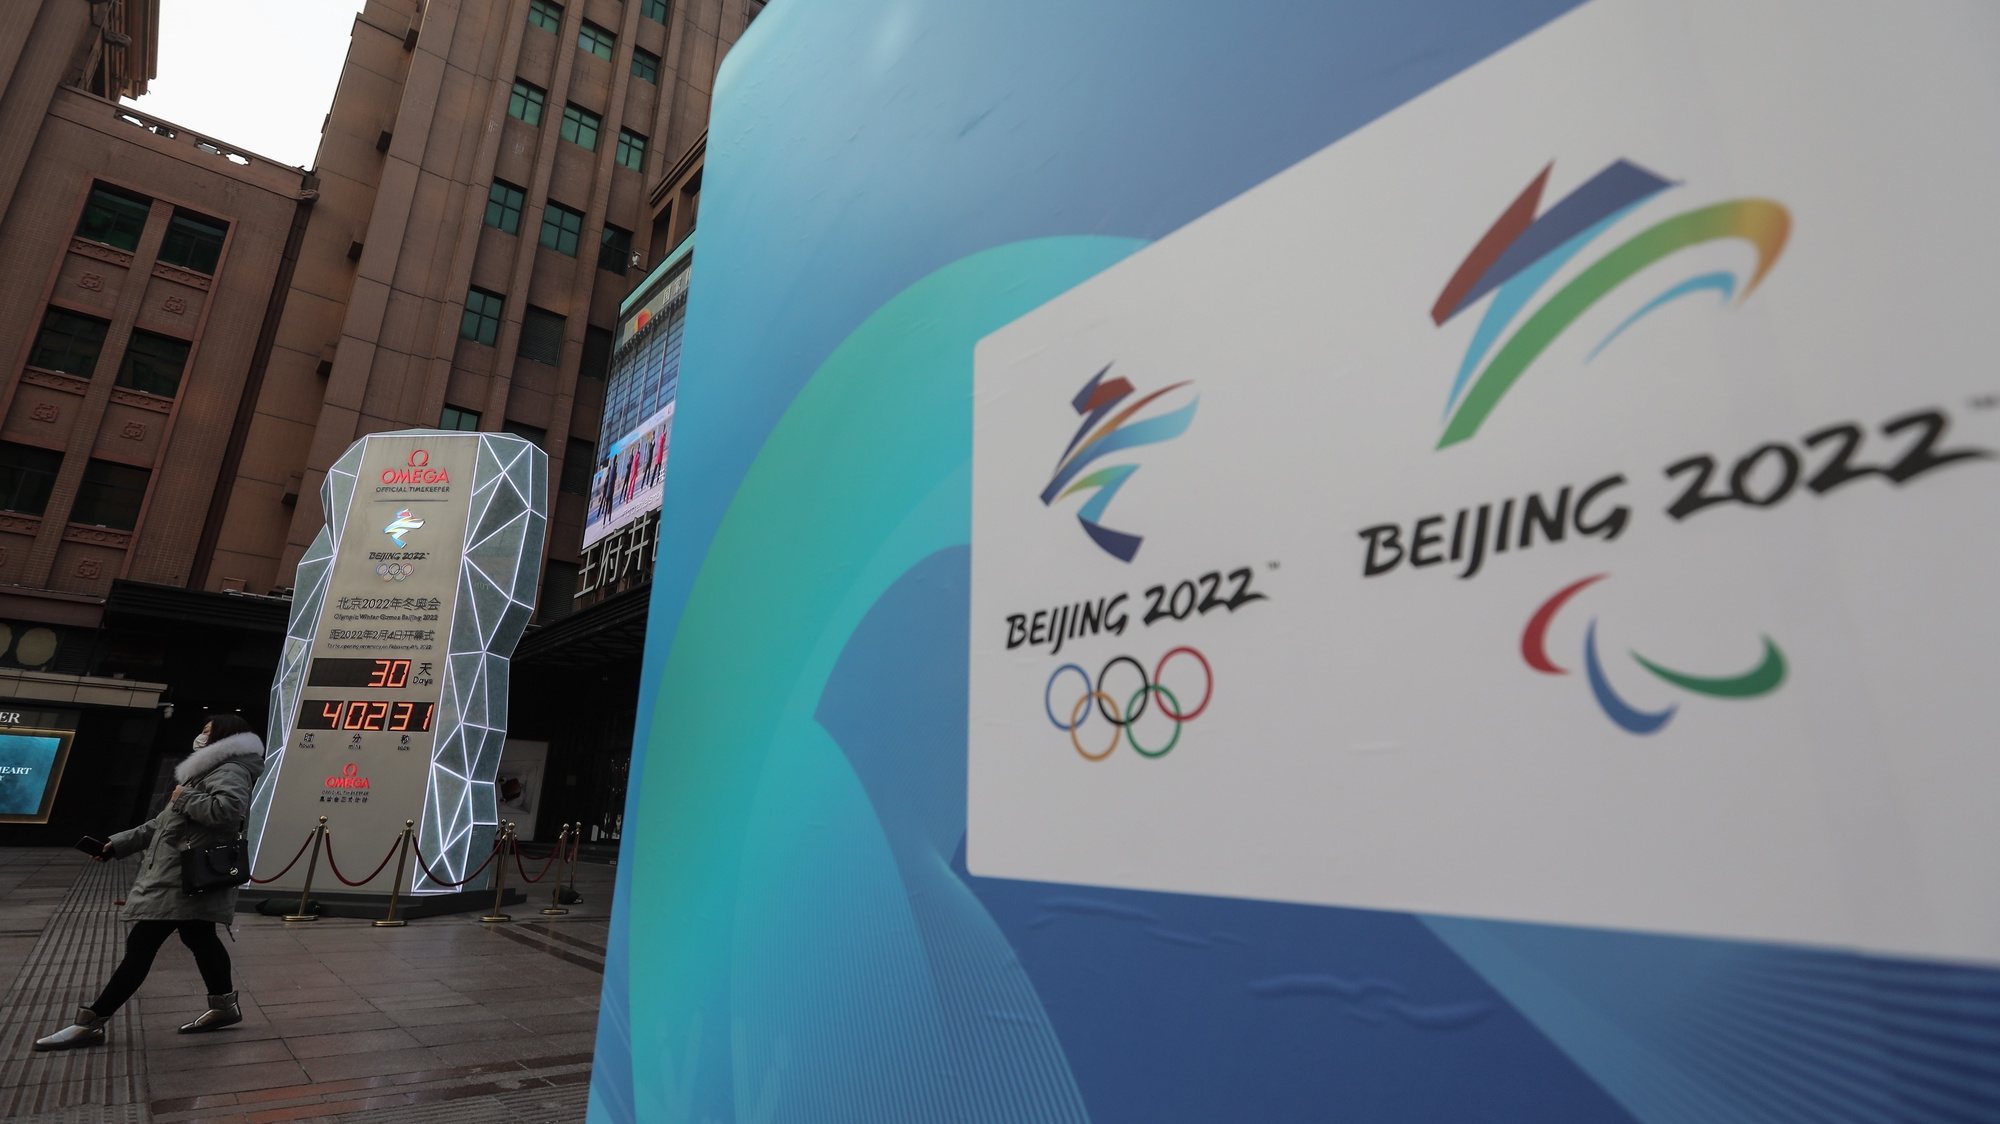 epa09667317 A clock showing 30 days left to the Beijing 2022 Winter Olympics at a street in Beijing, China, 05 January 2022. China is scheduled to host the 2022 Beijing Olympic and Paralympic Winter Games in February, making its capital the first city in the world to host both Summer (2008) and Winter Olympics (2022).  EPA/WU HONG